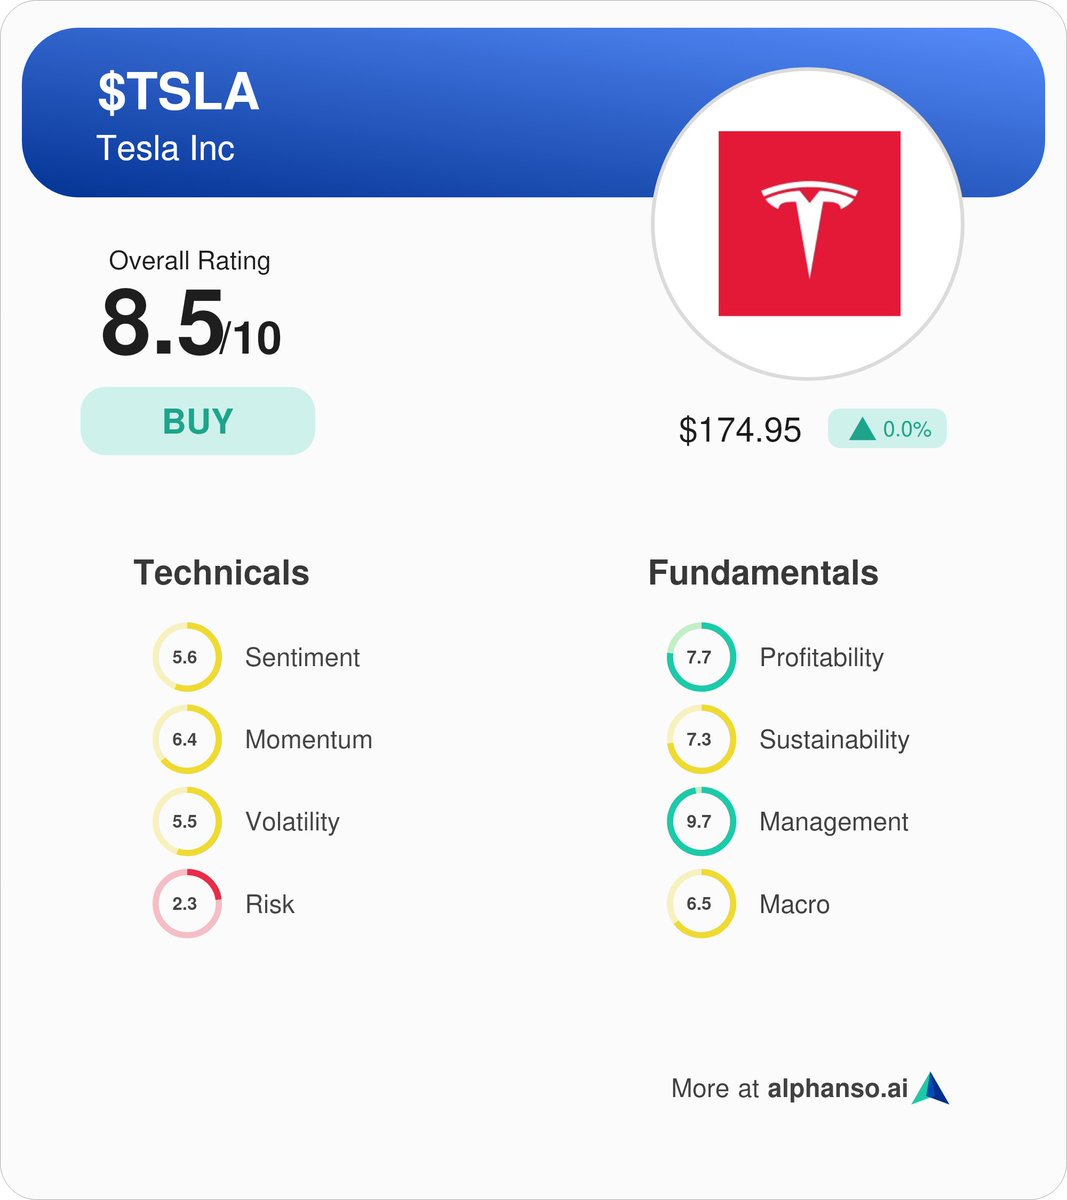 Tesla $TSLA is up 3.9% today. PepsiCo $PEP will triple its electric-powered California fleet over the next several months. The company will add 50 Tesla Semi trucks and install eight 750-kilowatt Tesla chargers and 2 Tesla megapack battery energy storage systems.
Alphanso rates